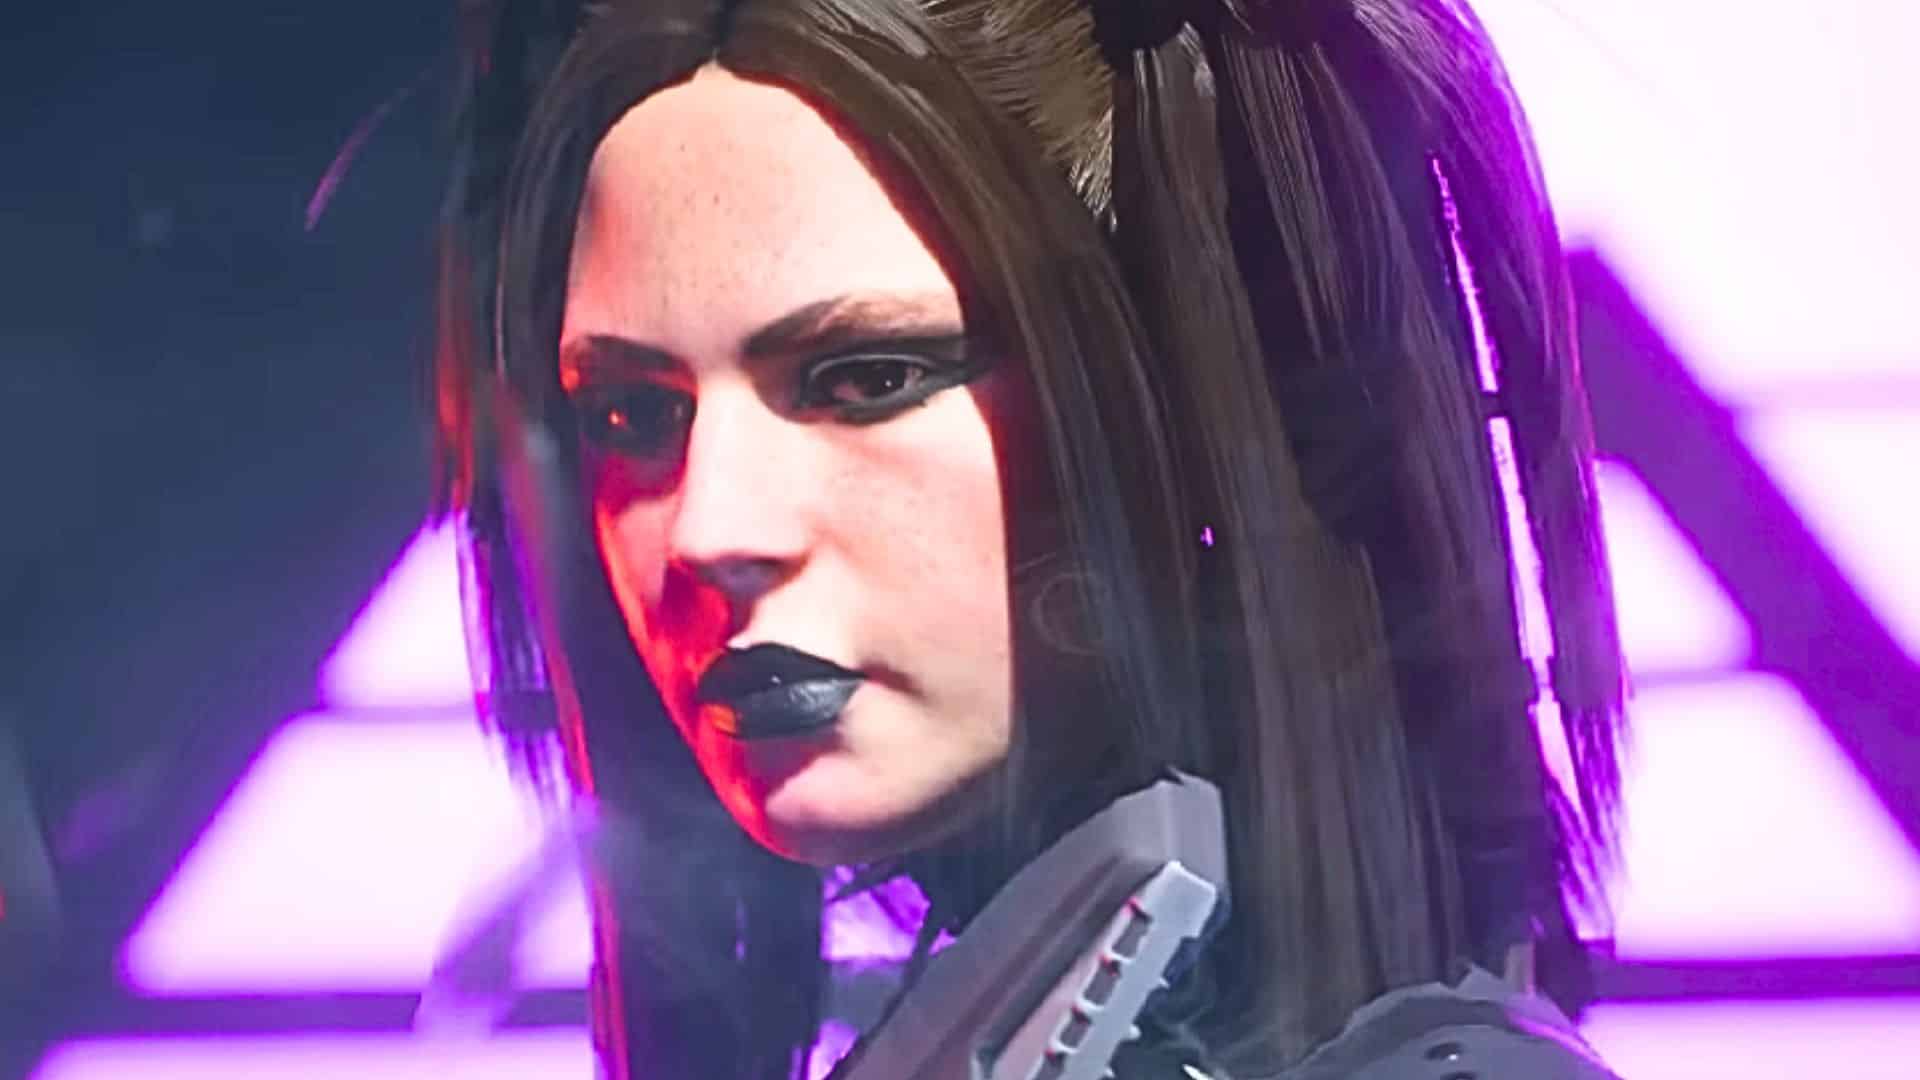 The Finals fans are still waiting for ‘goth mommy’ skin to drop